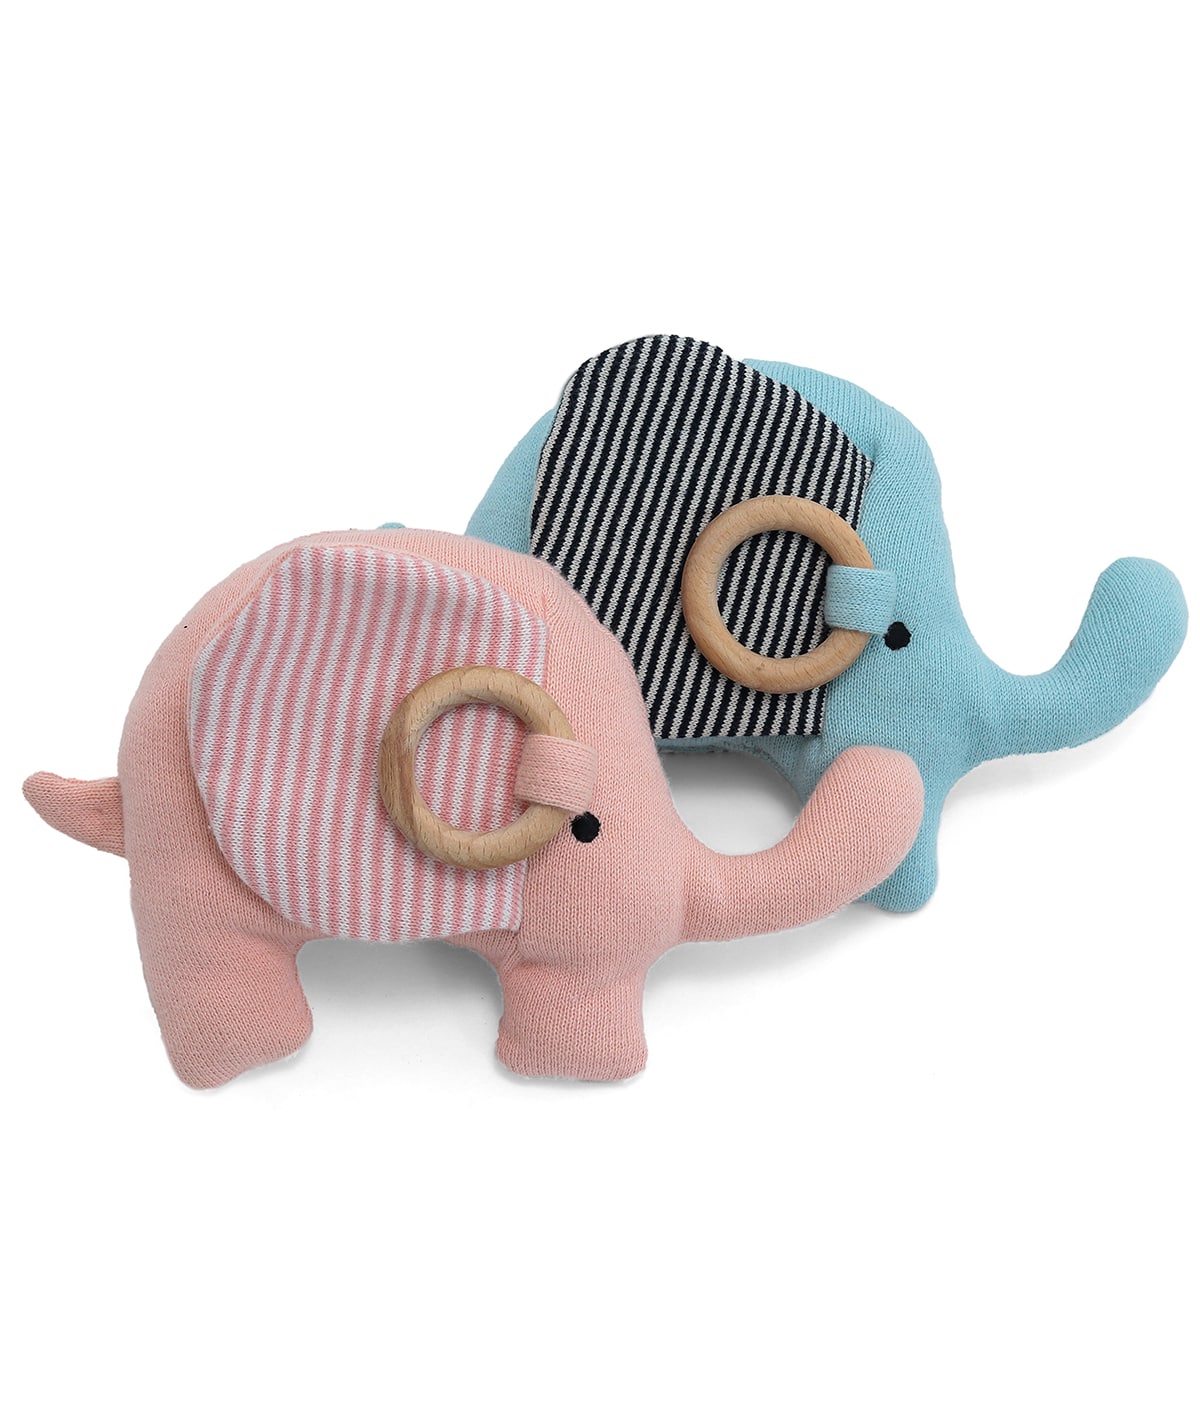 Crinkle Me Elephant Soother Toy Cotton Knitted Stuffed Soft Toy (Baby Pink & Natural)